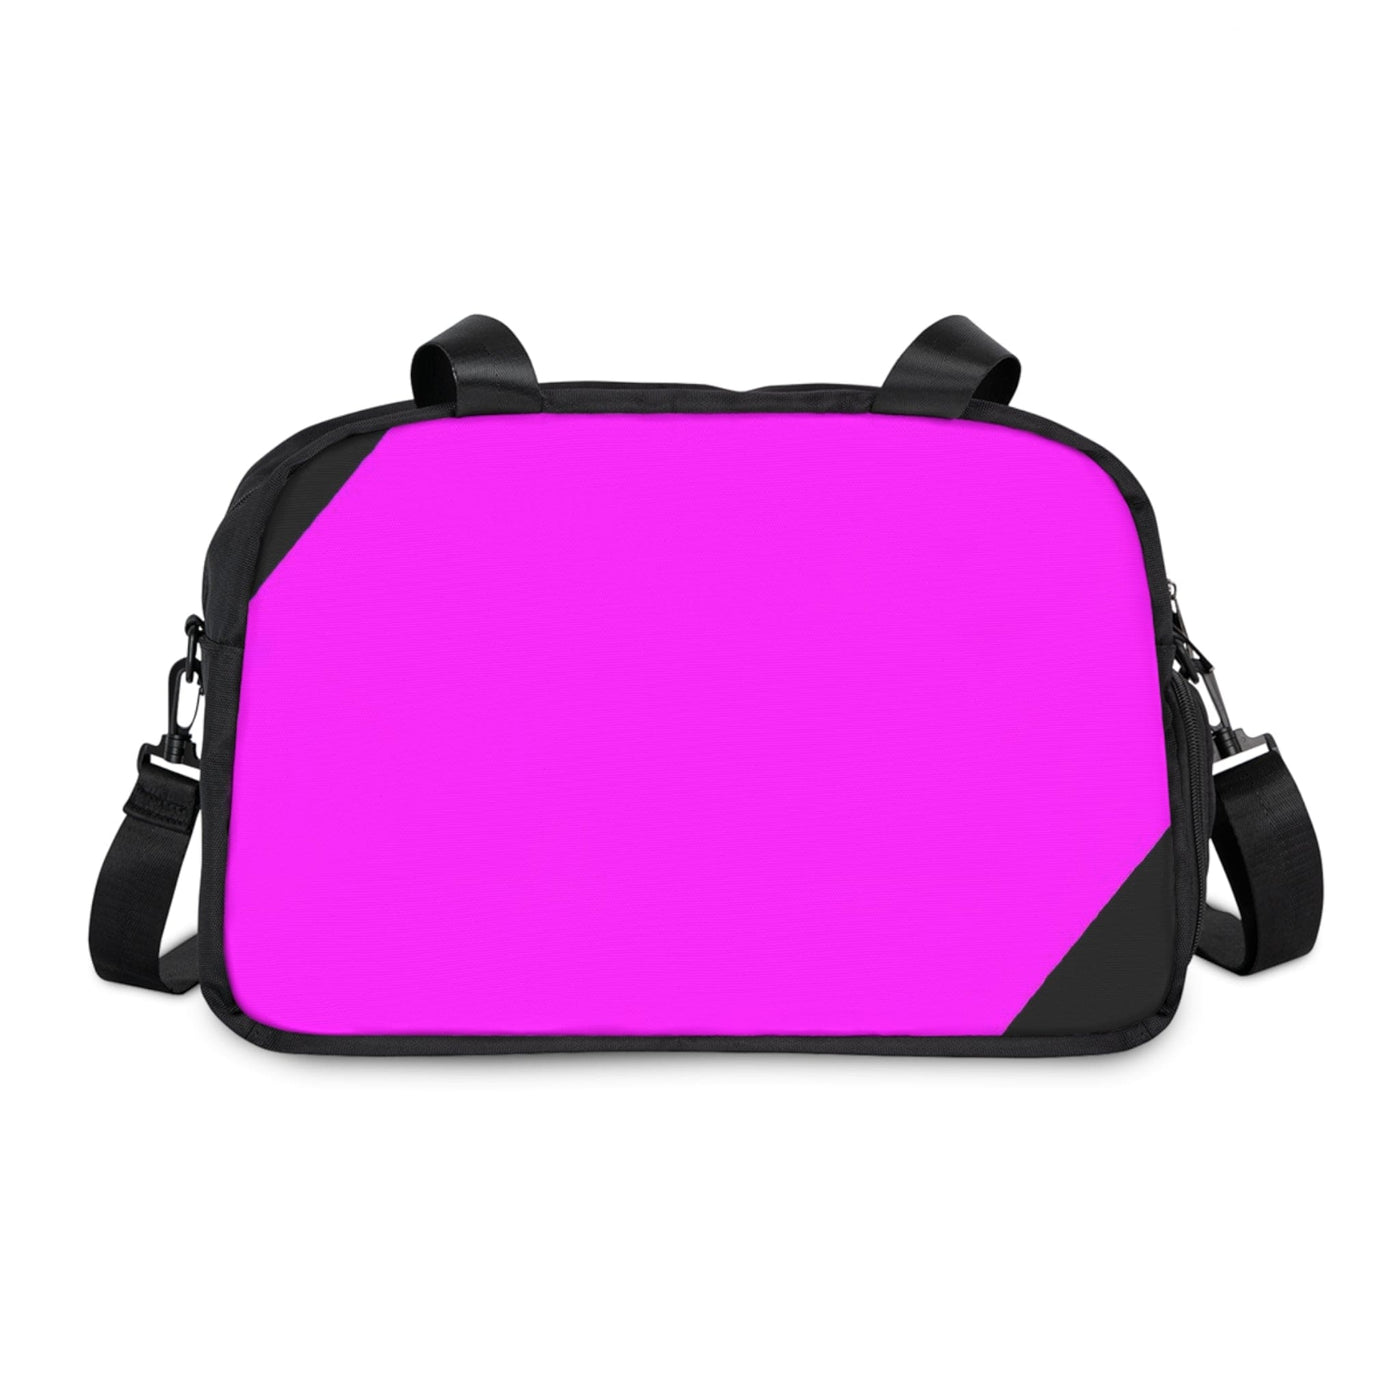 Travel Fitness Bag Black And Pink Pattern - Bags